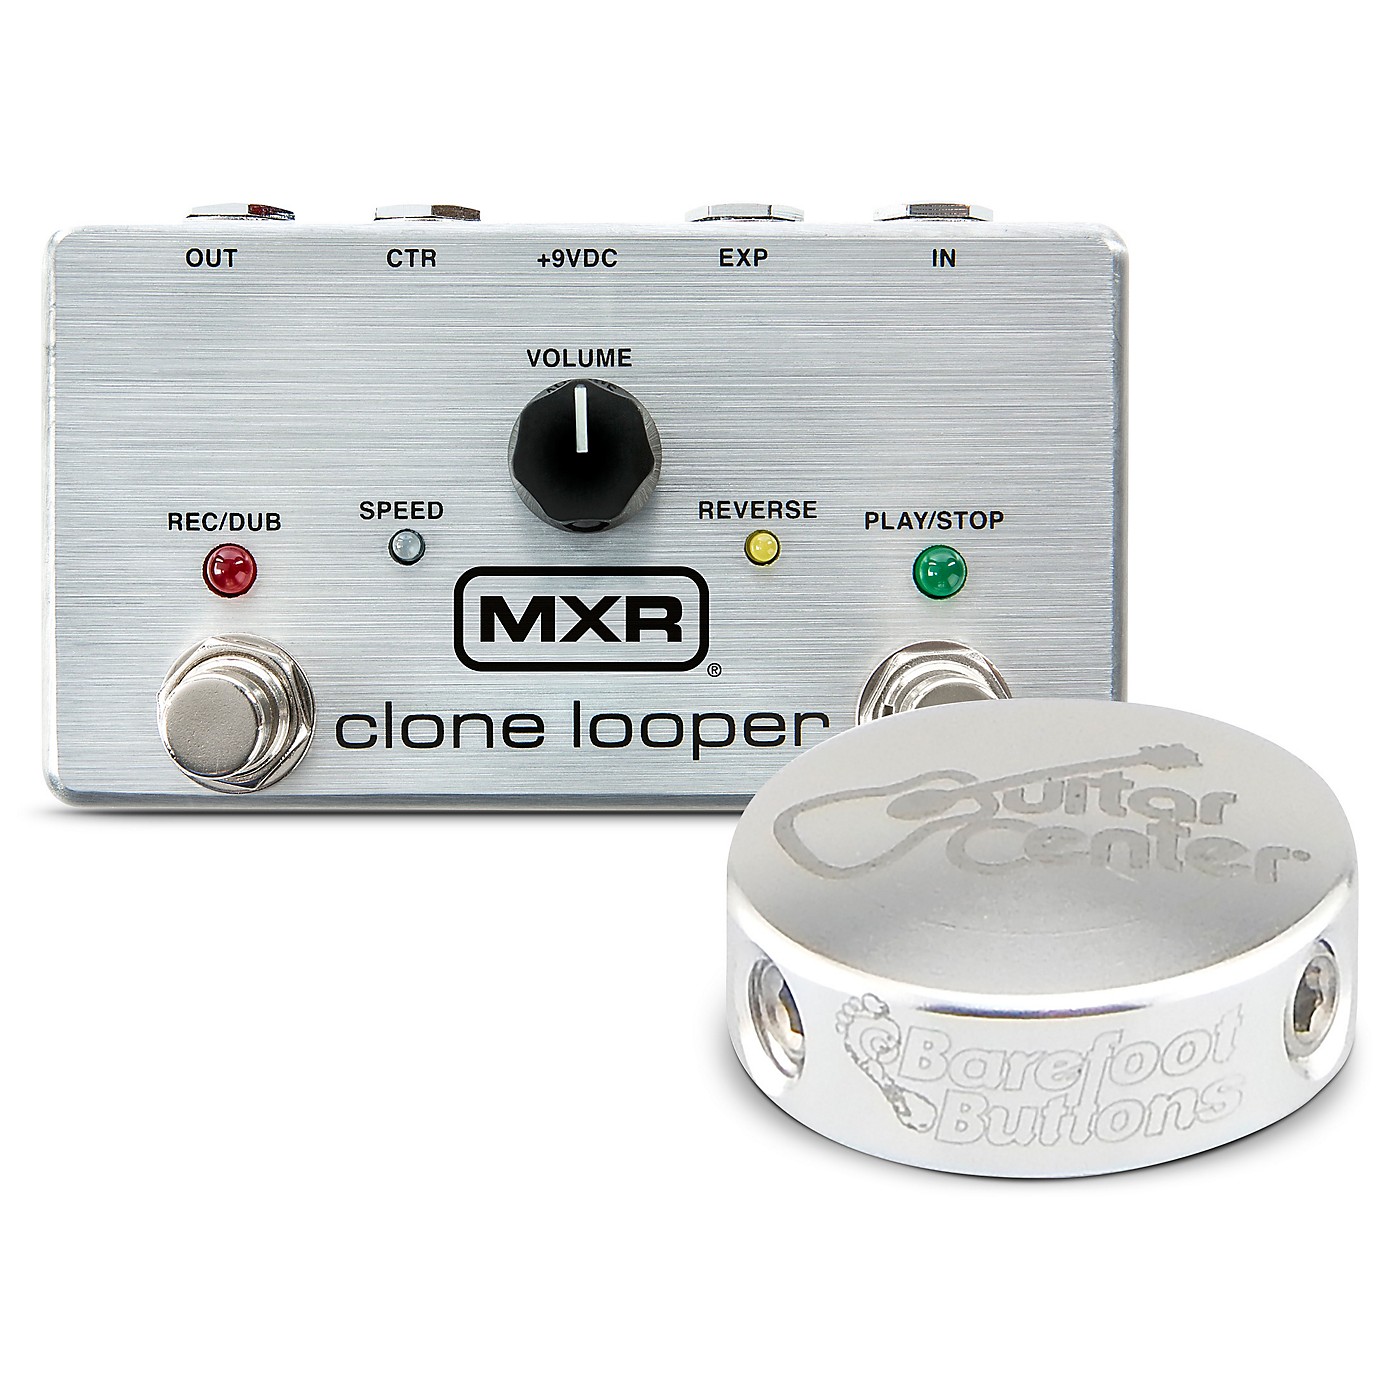 MXR M303 Clone Looper Effects Pedal With Free Barefoot Button Silver V1 Guitar Center Mini Footswitch Cap thumbnail